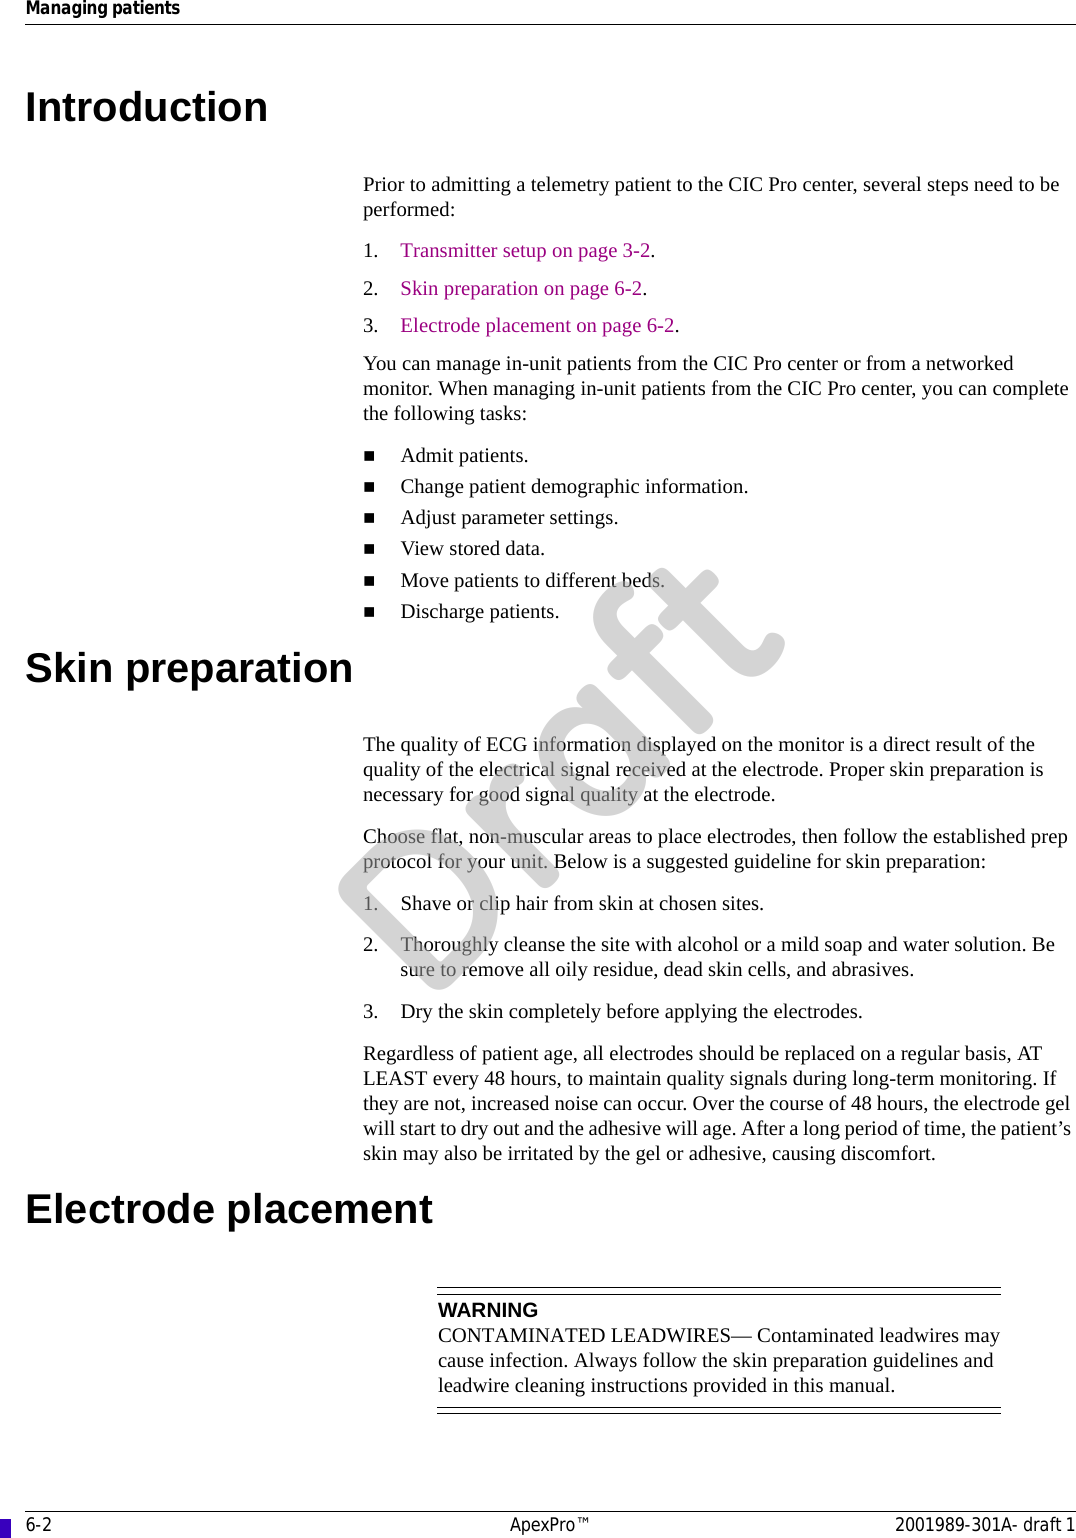 6-2 ApexPro™ 2001989-301A- draft 1Managing patientsIntroductionPrior to admitting a telemetry patient to the CIC Pro center, several steps need to be performed:1. Transmitter setup on page 3-2.2. Skin preparation on page 6-2.3. Electrode placement on page 6-2.You can manage in-unit patients from the CIC Pro center or from a networked monitor. When managing in-unit patients from the CIC Pro center, you can complete the following tasks:Admit patients.Change patient demographic information.Adjust parameter settings.View stored data.Move patients to different beds. Discharge patients.Skin preparationThe quality of ECG information displayed on the monitor is a direct result of the quality of the electrical signal received at the electrode. Proper skin preparation is necessary for good signal quality at the electrode.Choose flat, non-muscular areas to place electrodes, then follow the established prep protocol for your unit. Below is a suggested guideline for skin preparation:1. Shave or clip hair from skin at chosen sites.2. Thoroughly cleanse the site with alcohol or a mild soap and water solution. Be sure to remove all oily residue, dead skin cells, and abrasives.3. Dry the skin completely before applying the electrodes.Regardless of patient age, all electrodes should be replaced on a regular basis, AT LEAST every 48 hours, to maintain quality signals during long-term monitoring. If they are not, increased noise can occur. Over the course of 48 hours, the electrode gel will start to dry out and the adhesive will age. After a long period of time, the patient’s skin may also be irritated by the gel or adhesive, causing discomfort.Electrode placementWARNINGCONTAMINATED LEADWIRES— Contaminated leadwires may cause infection. Always follow the skin preparation guidelines and leadwire cleaning instructions provided in this manual.Draft